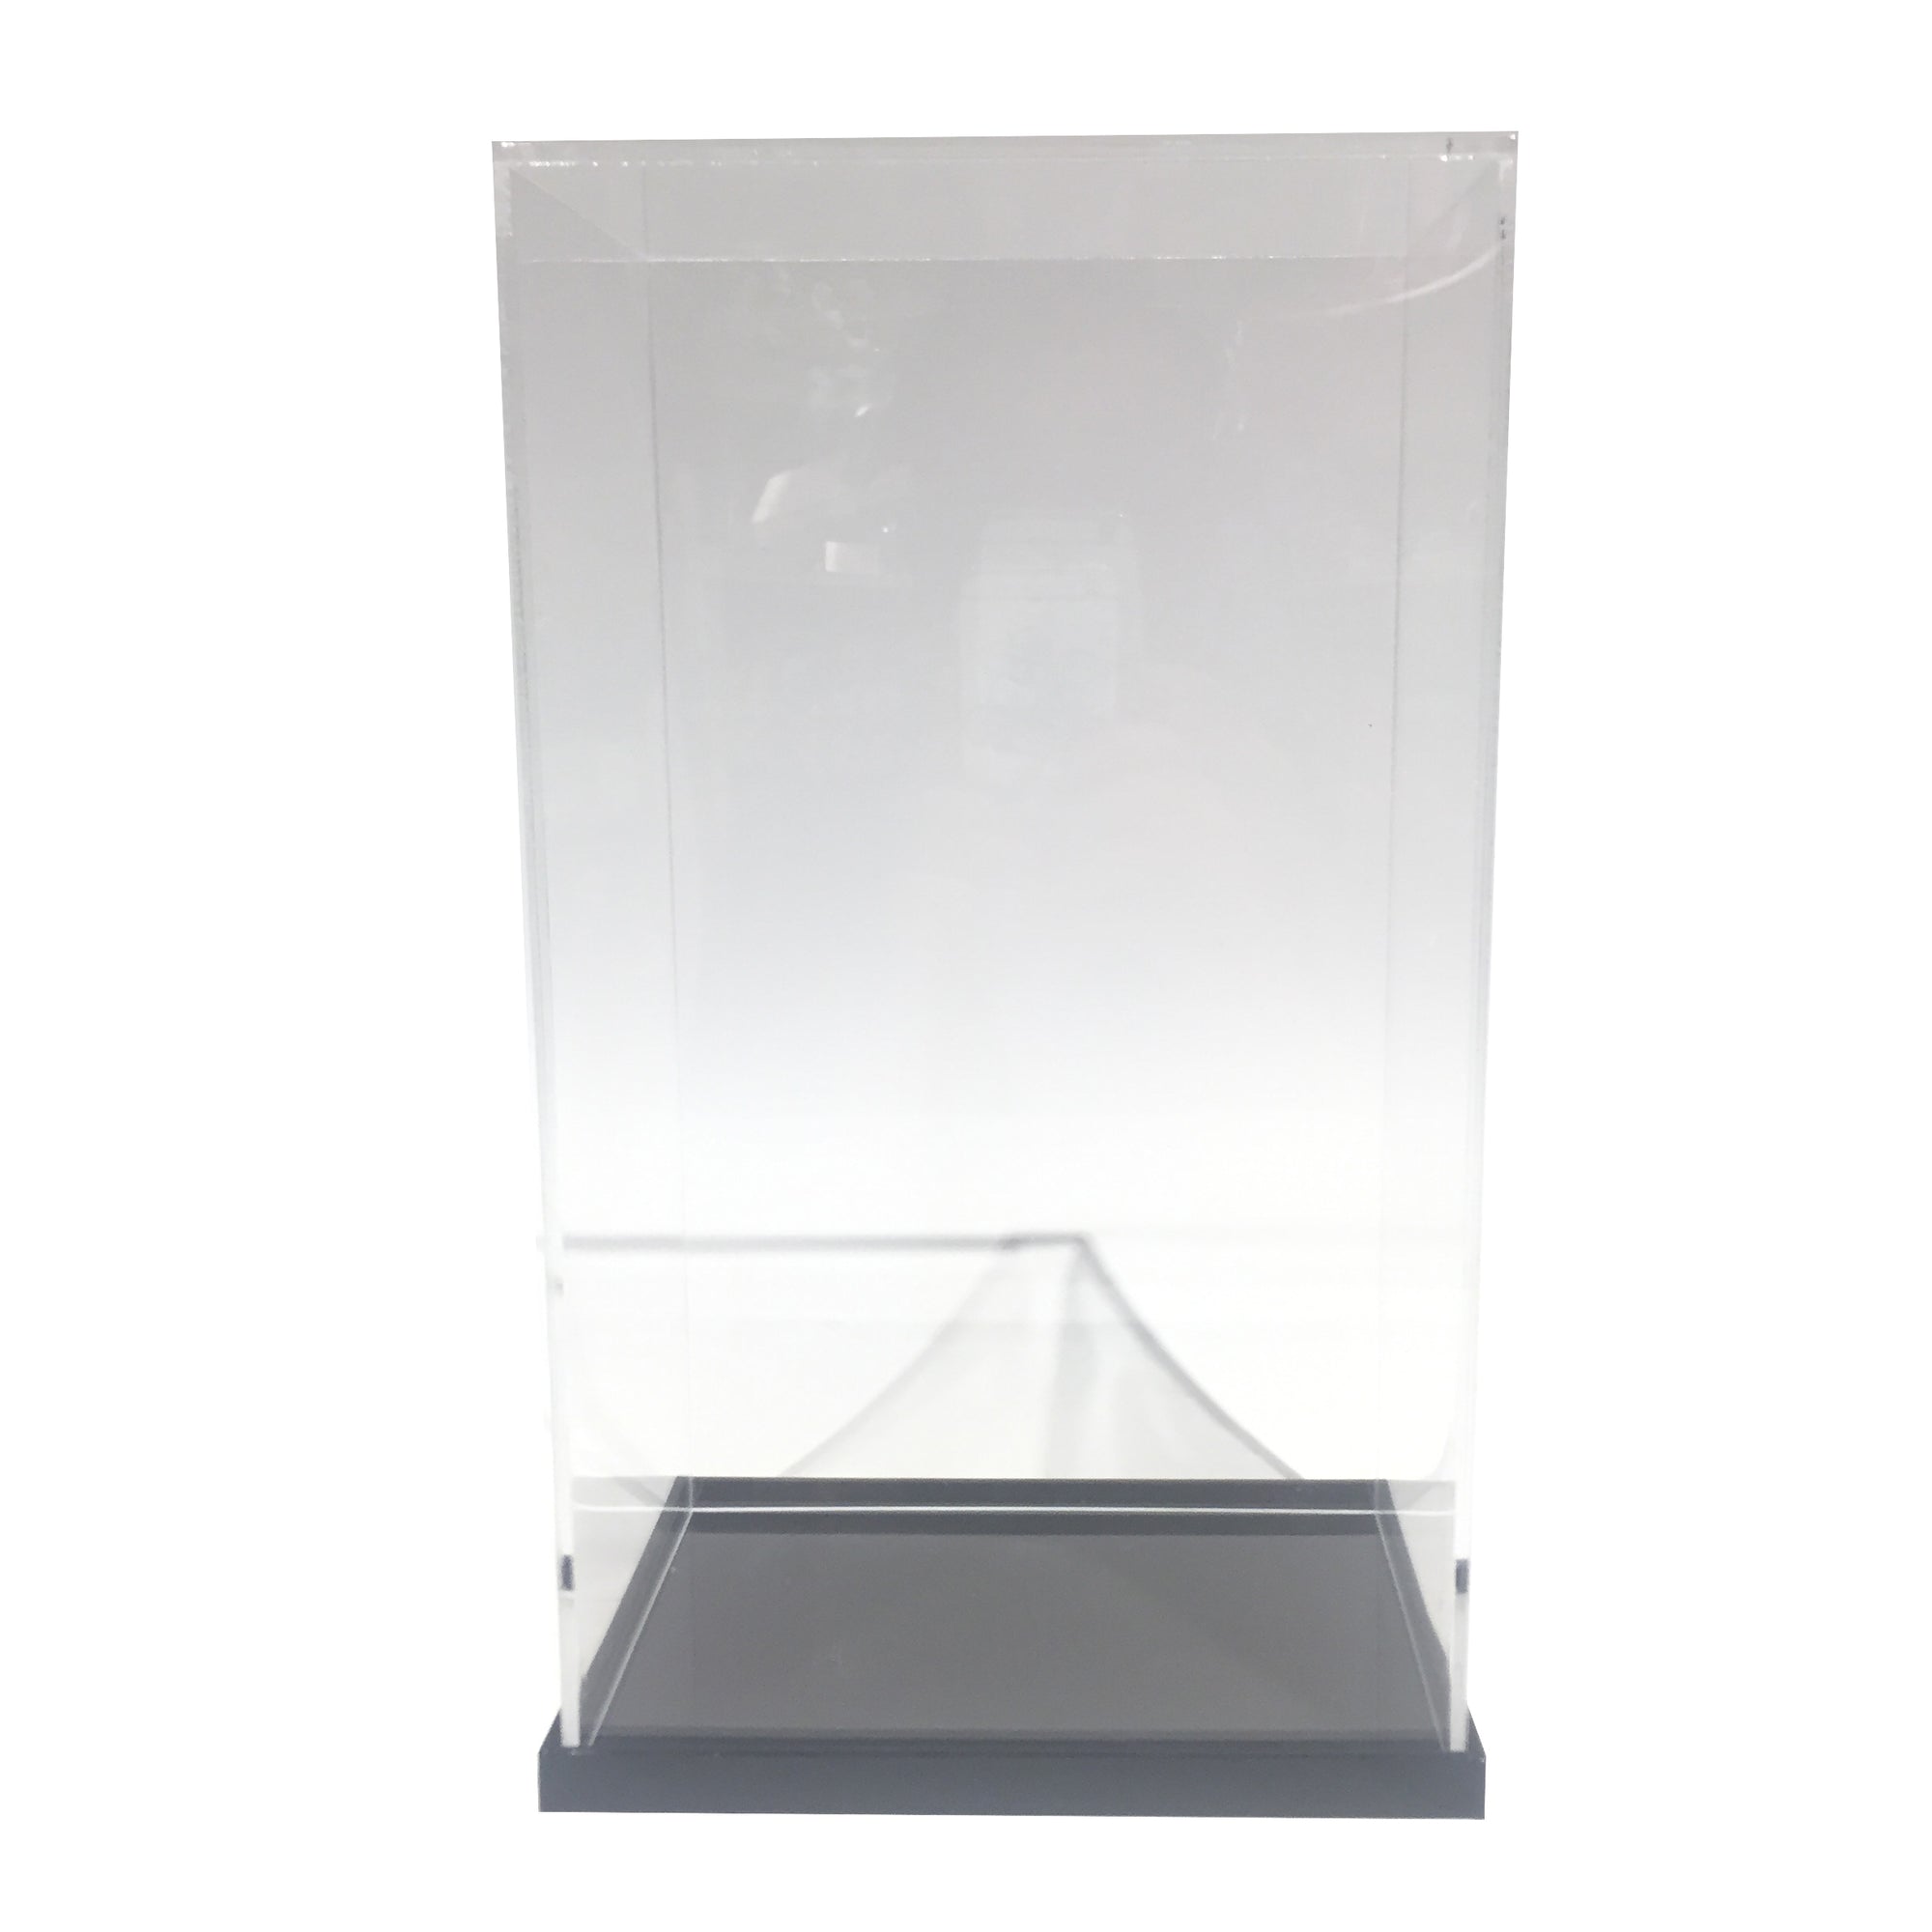 12" inch Stackable Acrylic Toy Display Case